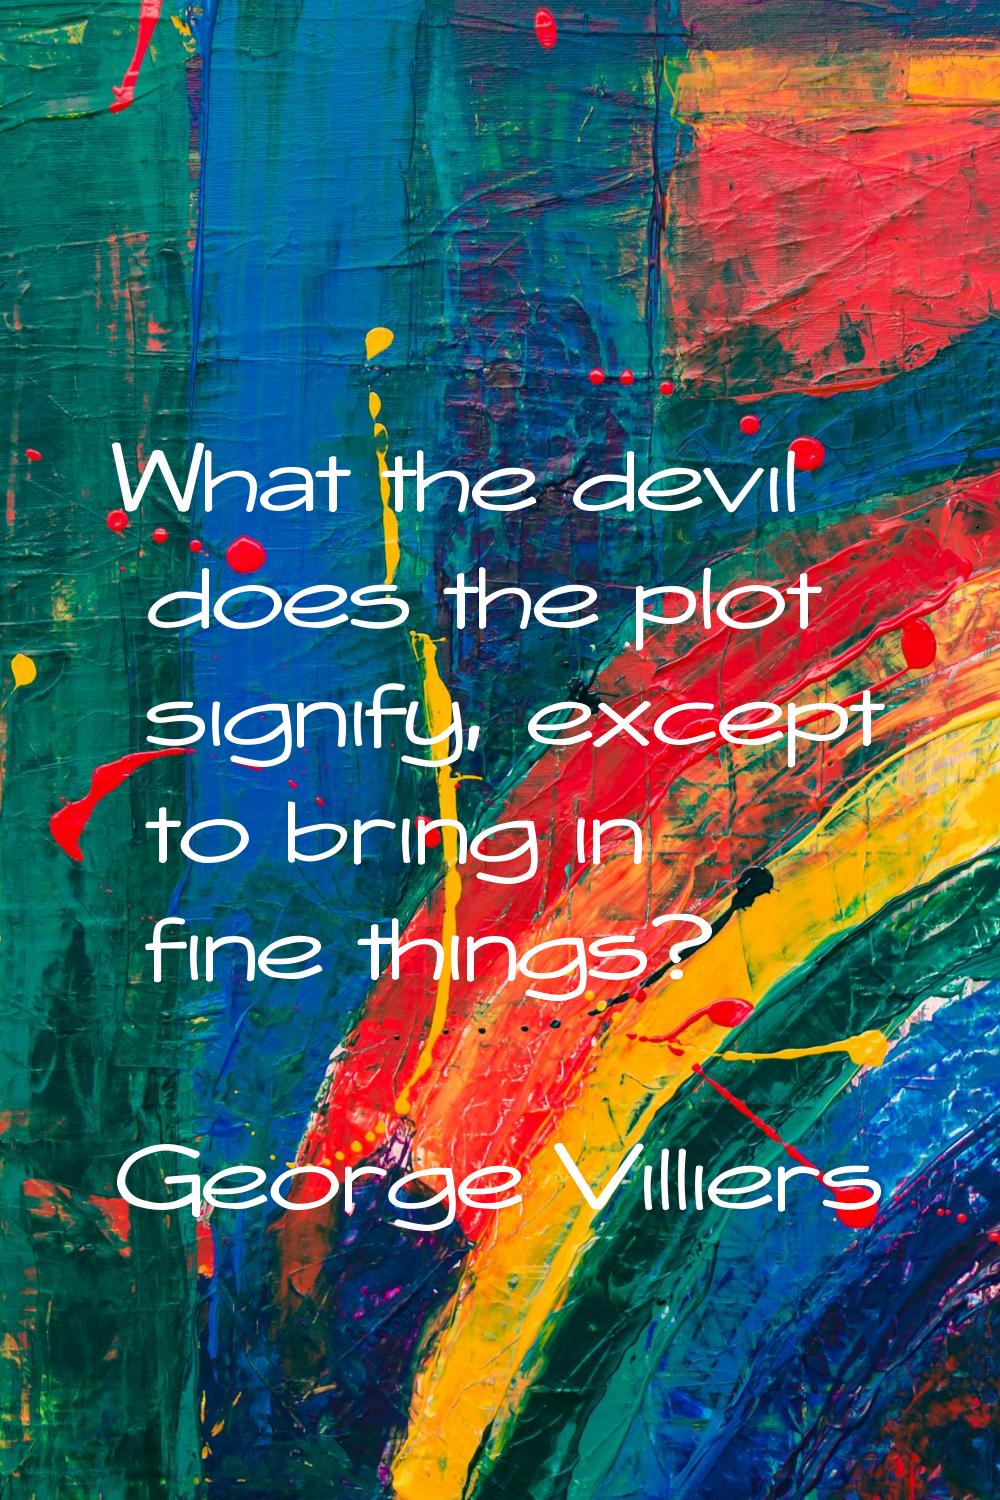 What the devil does the plot signify, except to bring in fine things?